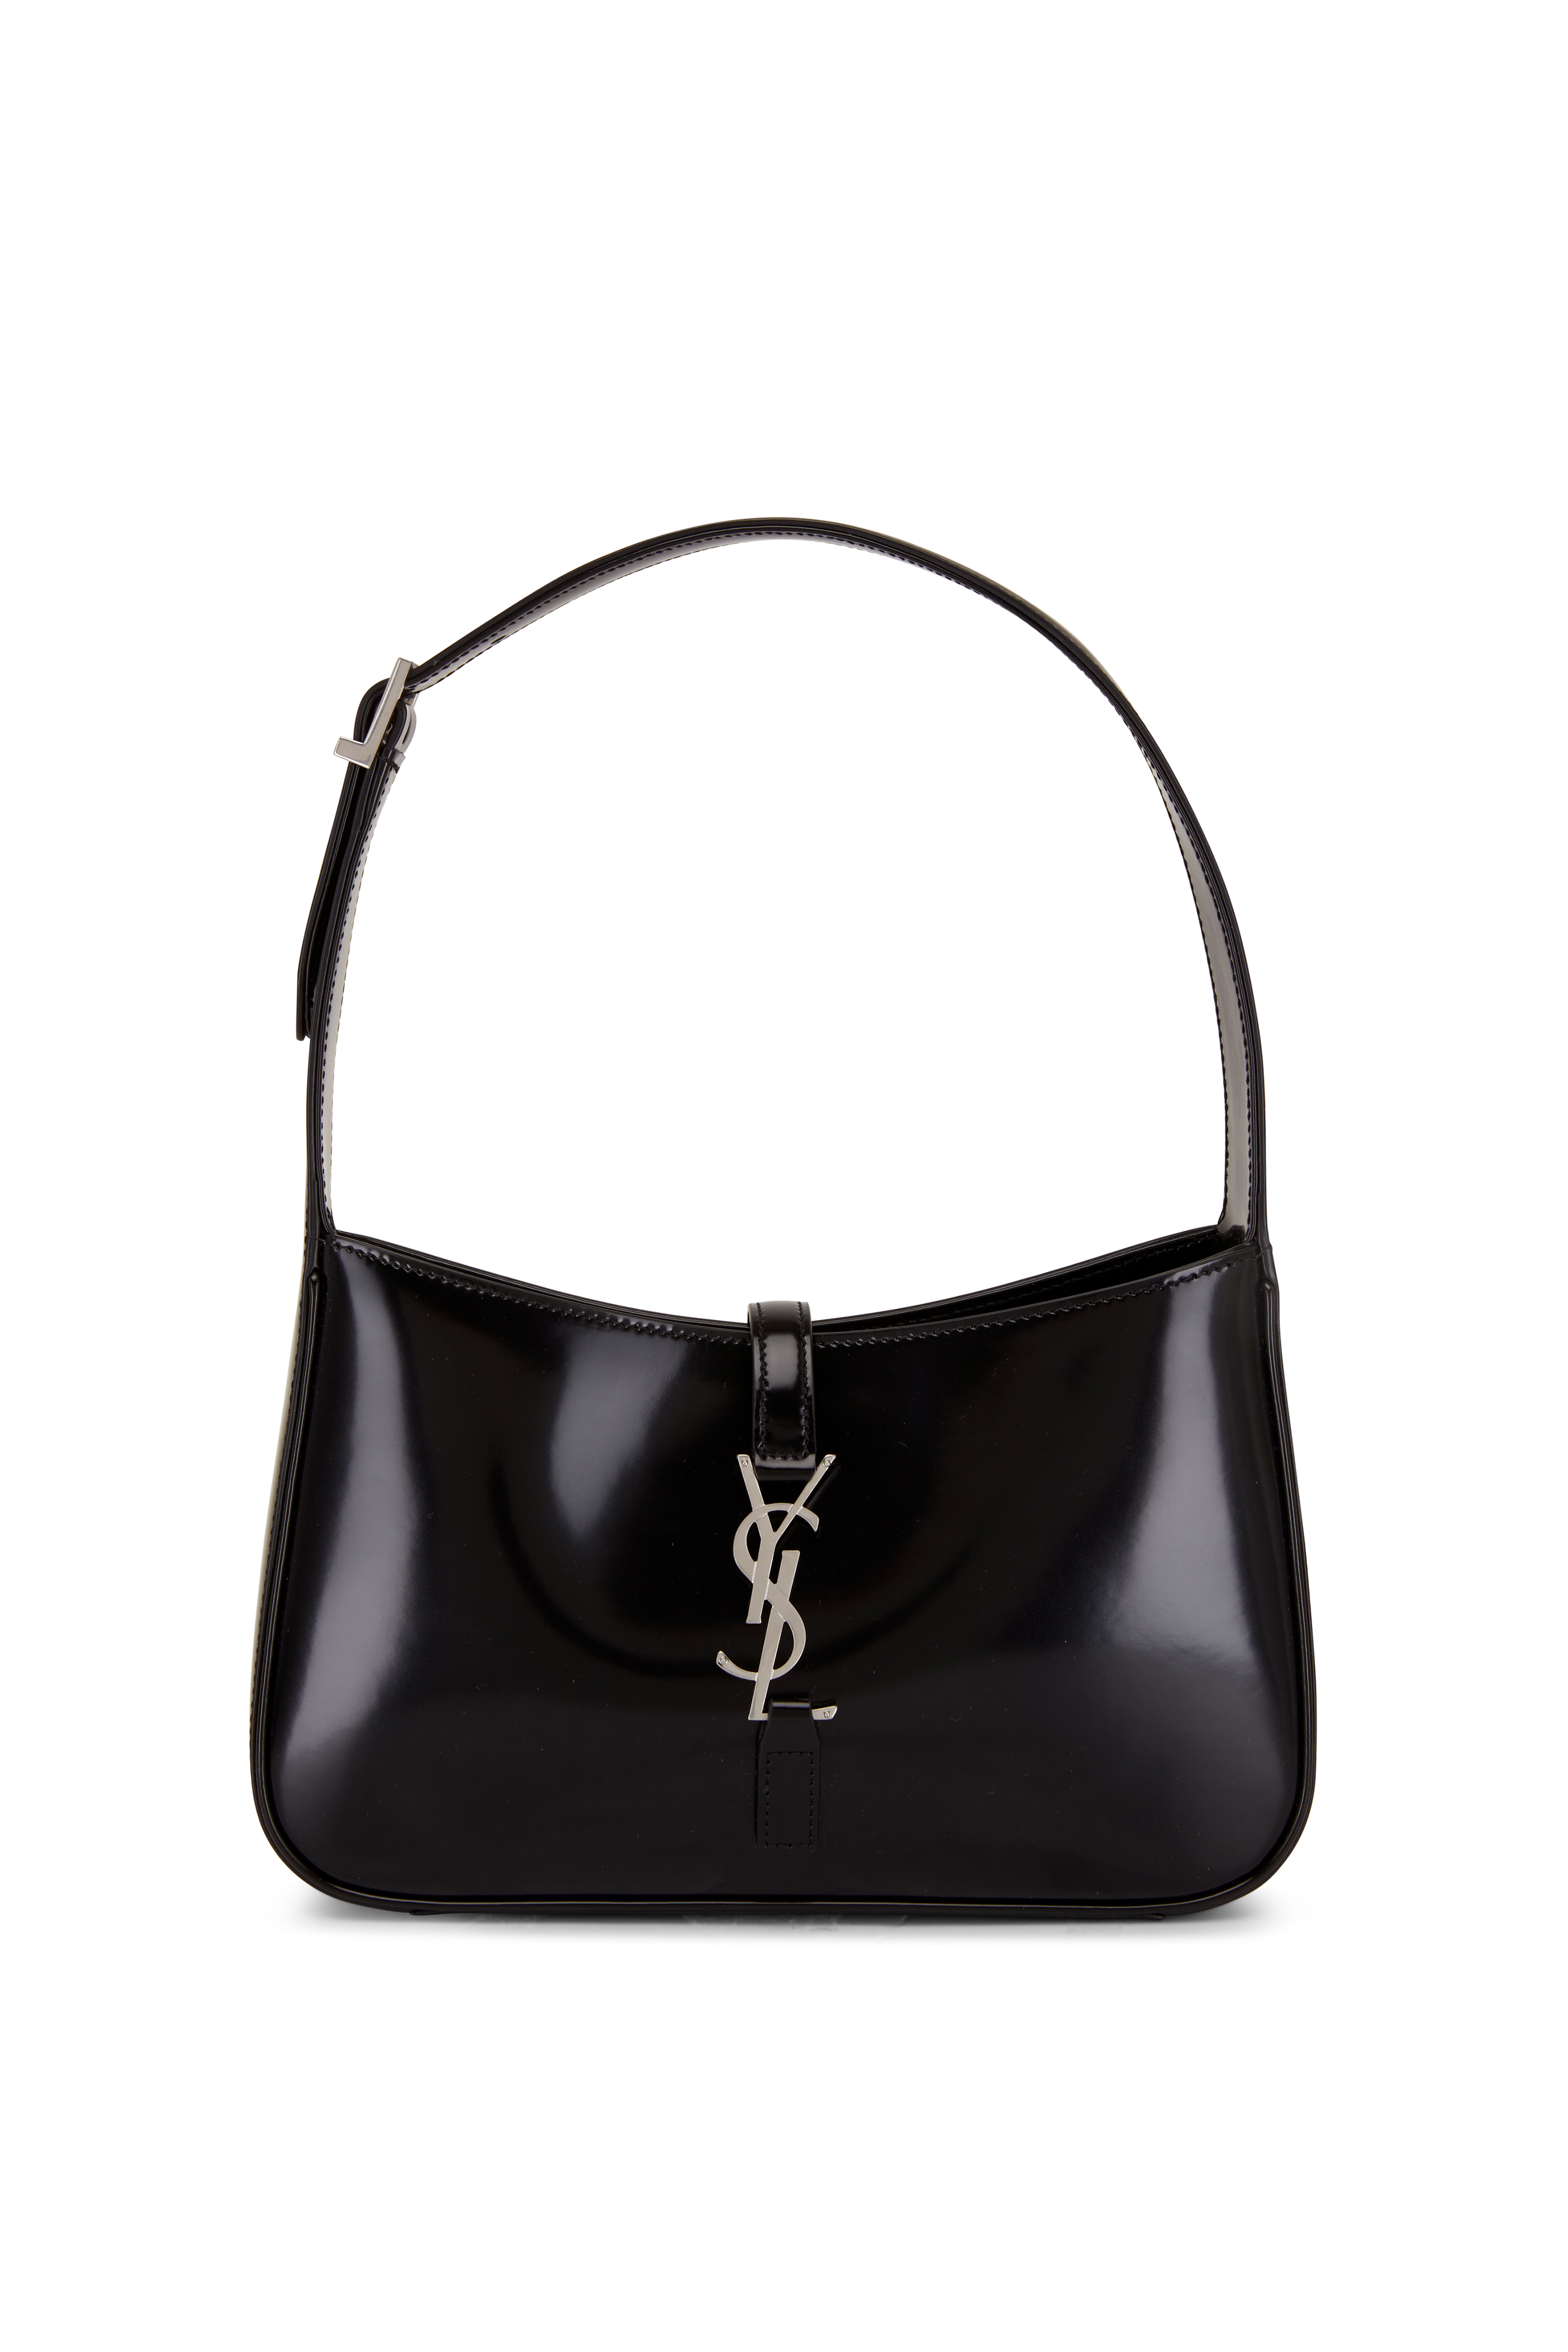 Tom Ford - Alix Black Leather Hobo Bag | Mitchell Stores